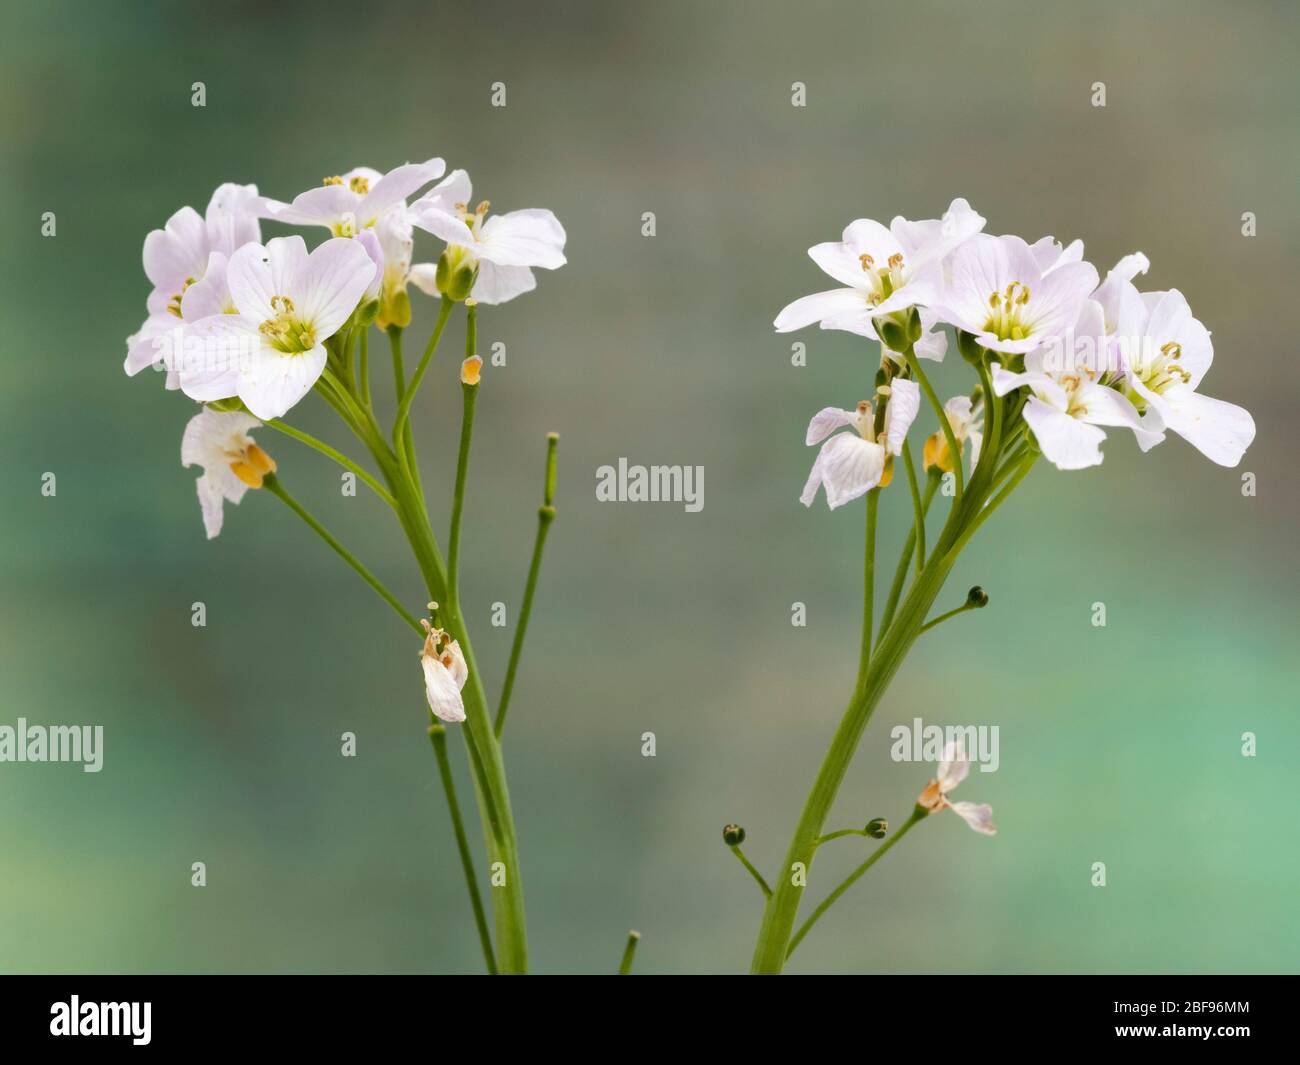 Delicate pale pink and white spring flowers of lady's smock, Cardamine pratensis, an UK wildflower Stock Photo